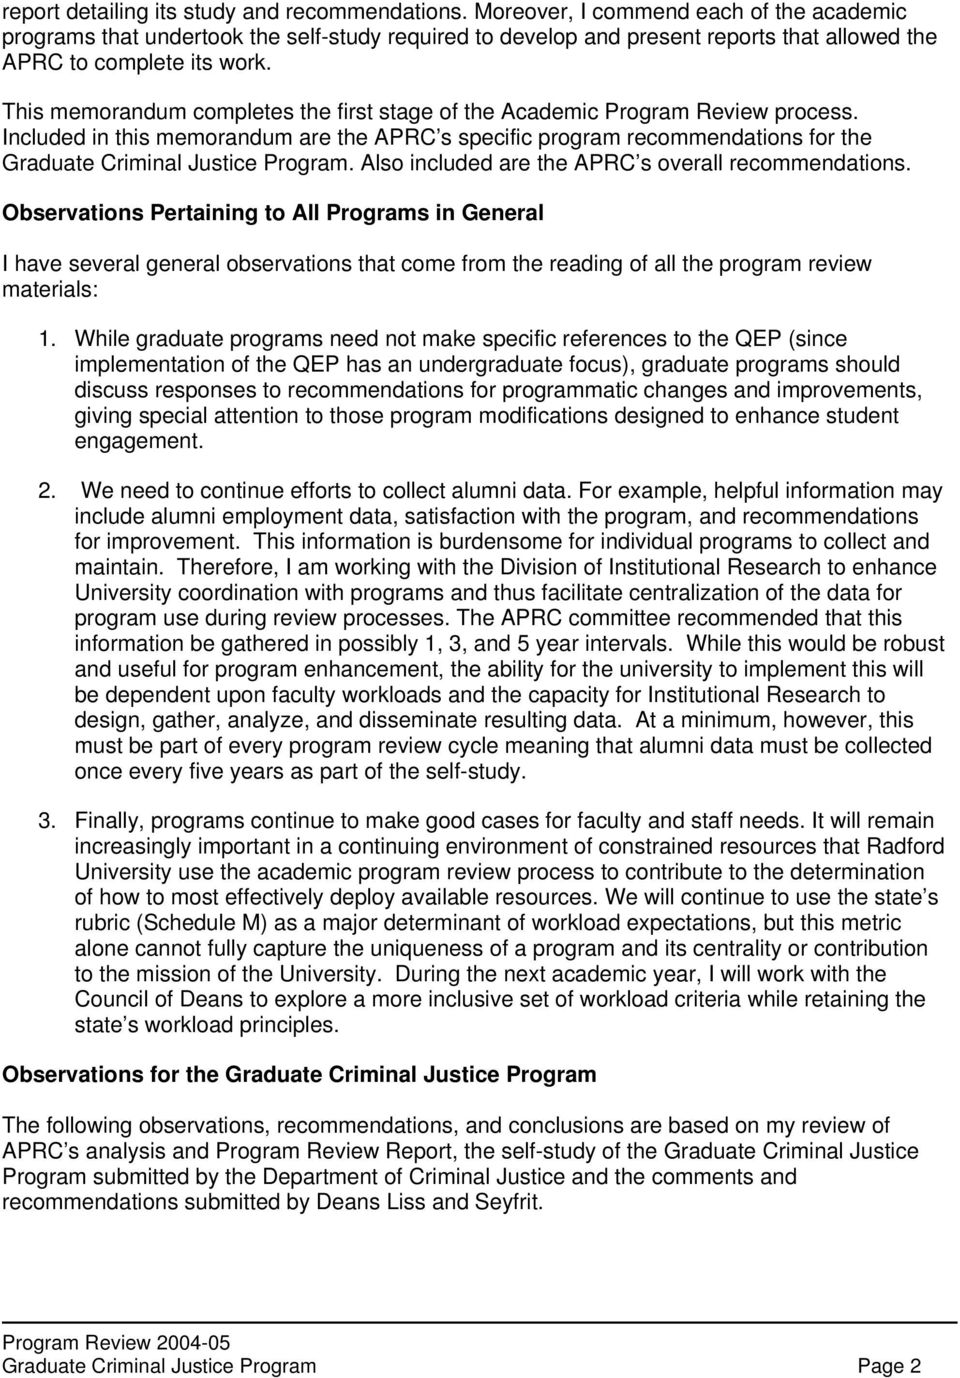 This memorandum completes the first stage of the Academic Program Review process. Included in this memorandum are the APRC s specific program recommendations for the Graduate Criminal Justice Program.